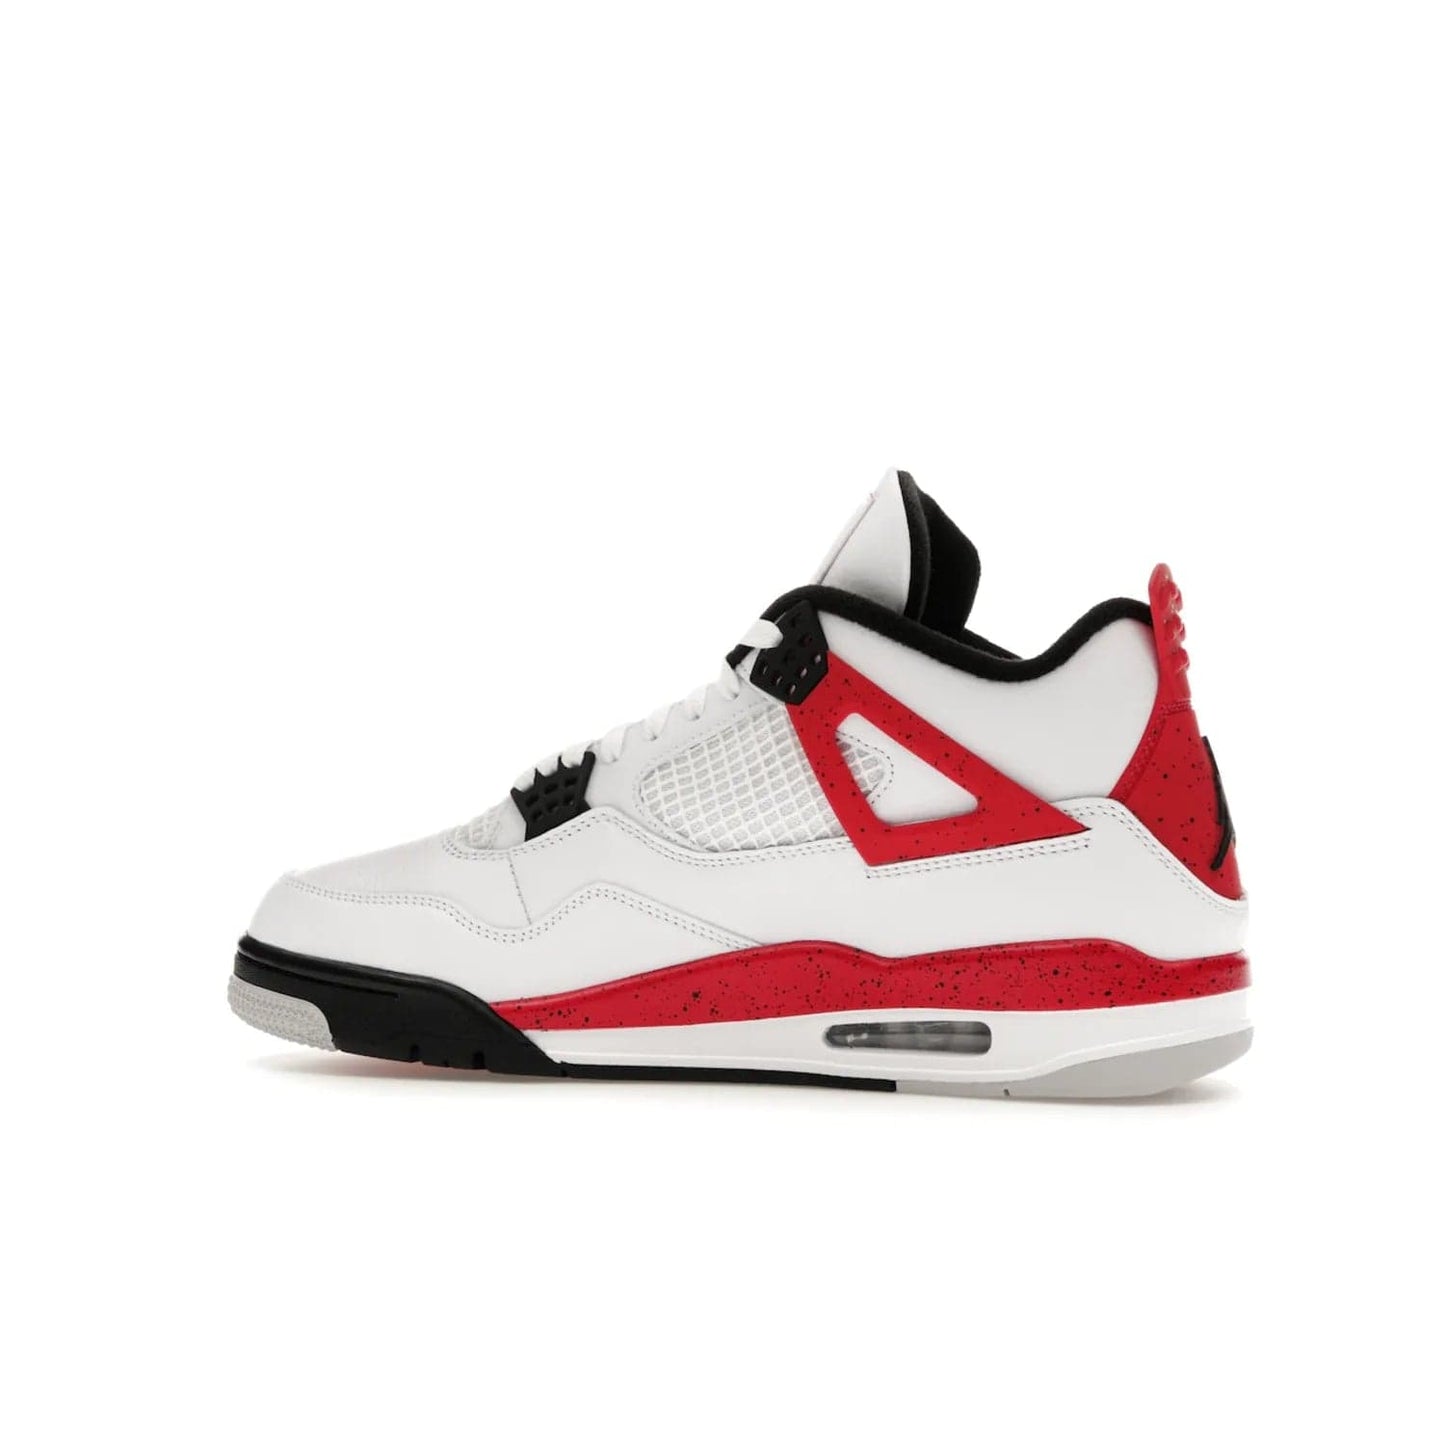 Jordan 4 Retro Red Cement - Image 21 - Only at www.BallersClubKickz.com - Iconic Jordan silhouette with a unique twist. White premium leather uppers with fire red and black detailing. Black, white, and fire red midsole with mesh detailing and Jumpman logo. Jordan 4 Retro Red Cement released with premium price.